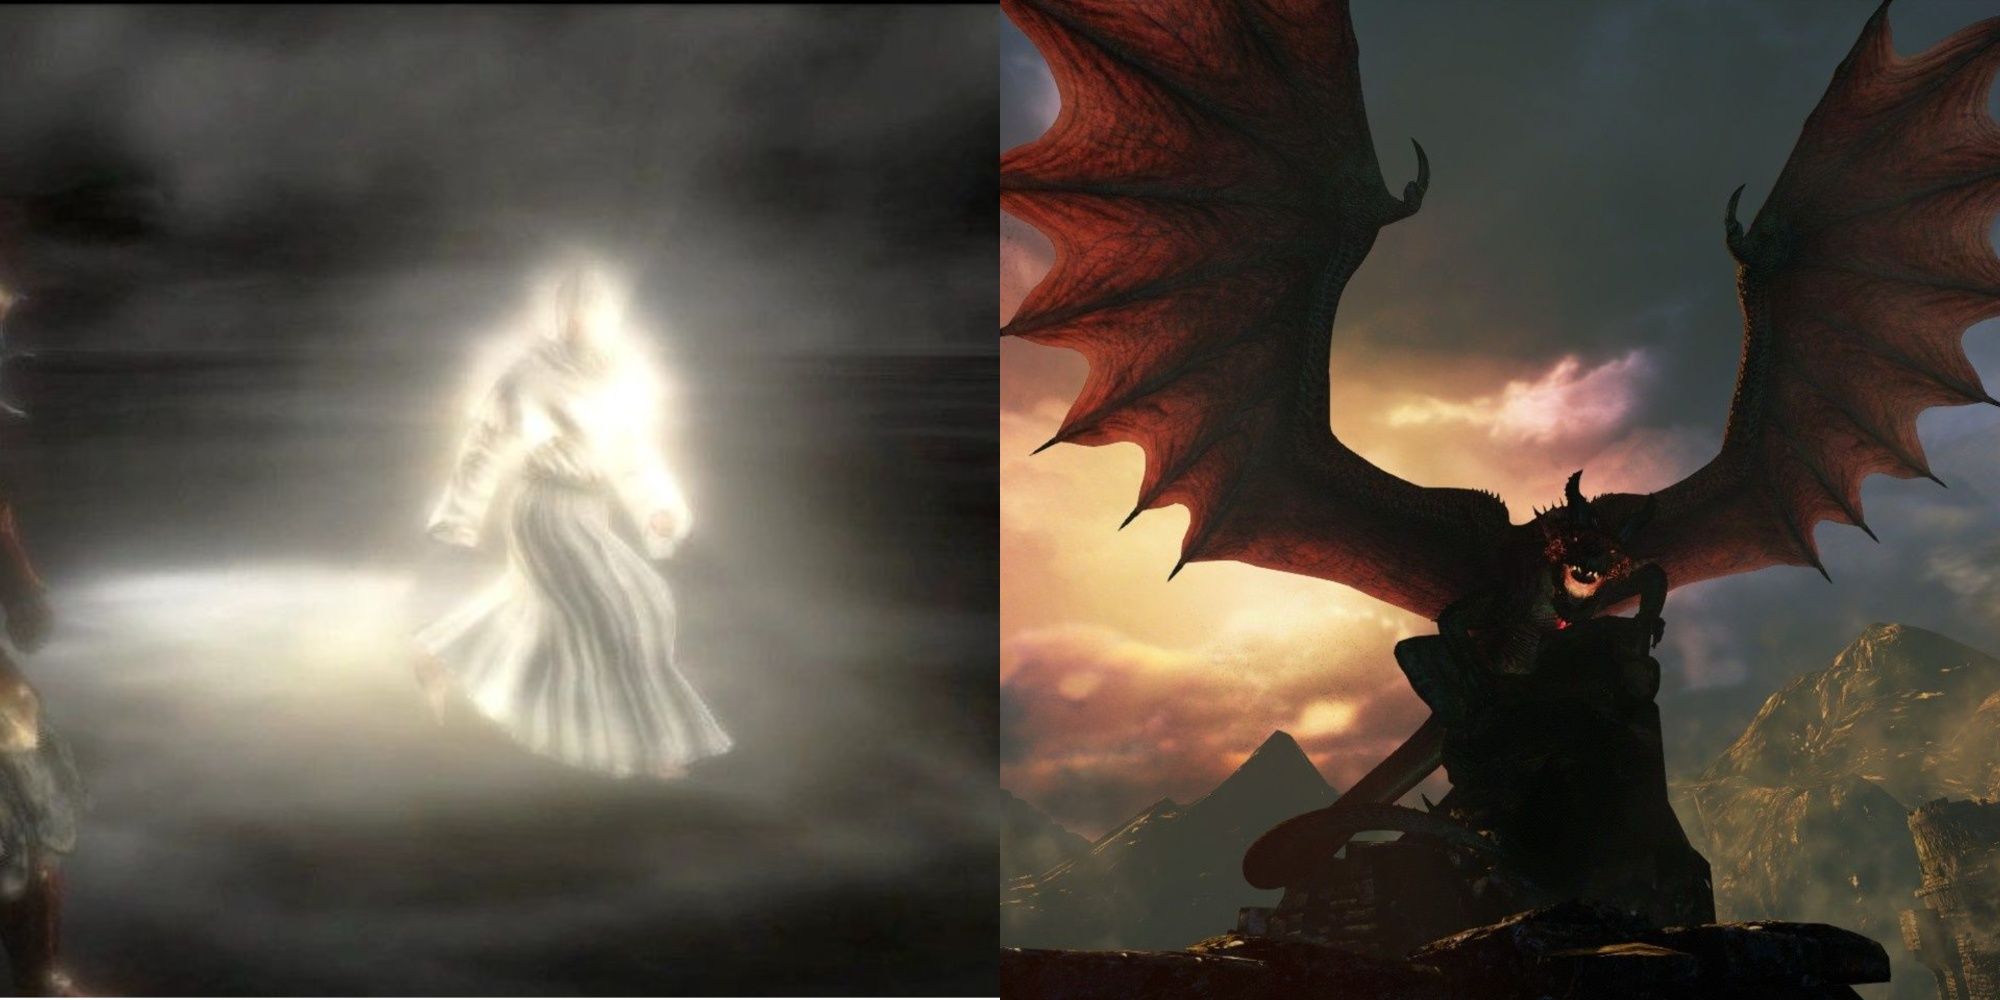 Dragon's Dogma the Seneschal walking in a misty area while glowing, and Grigori with his wings outstretched and roaring